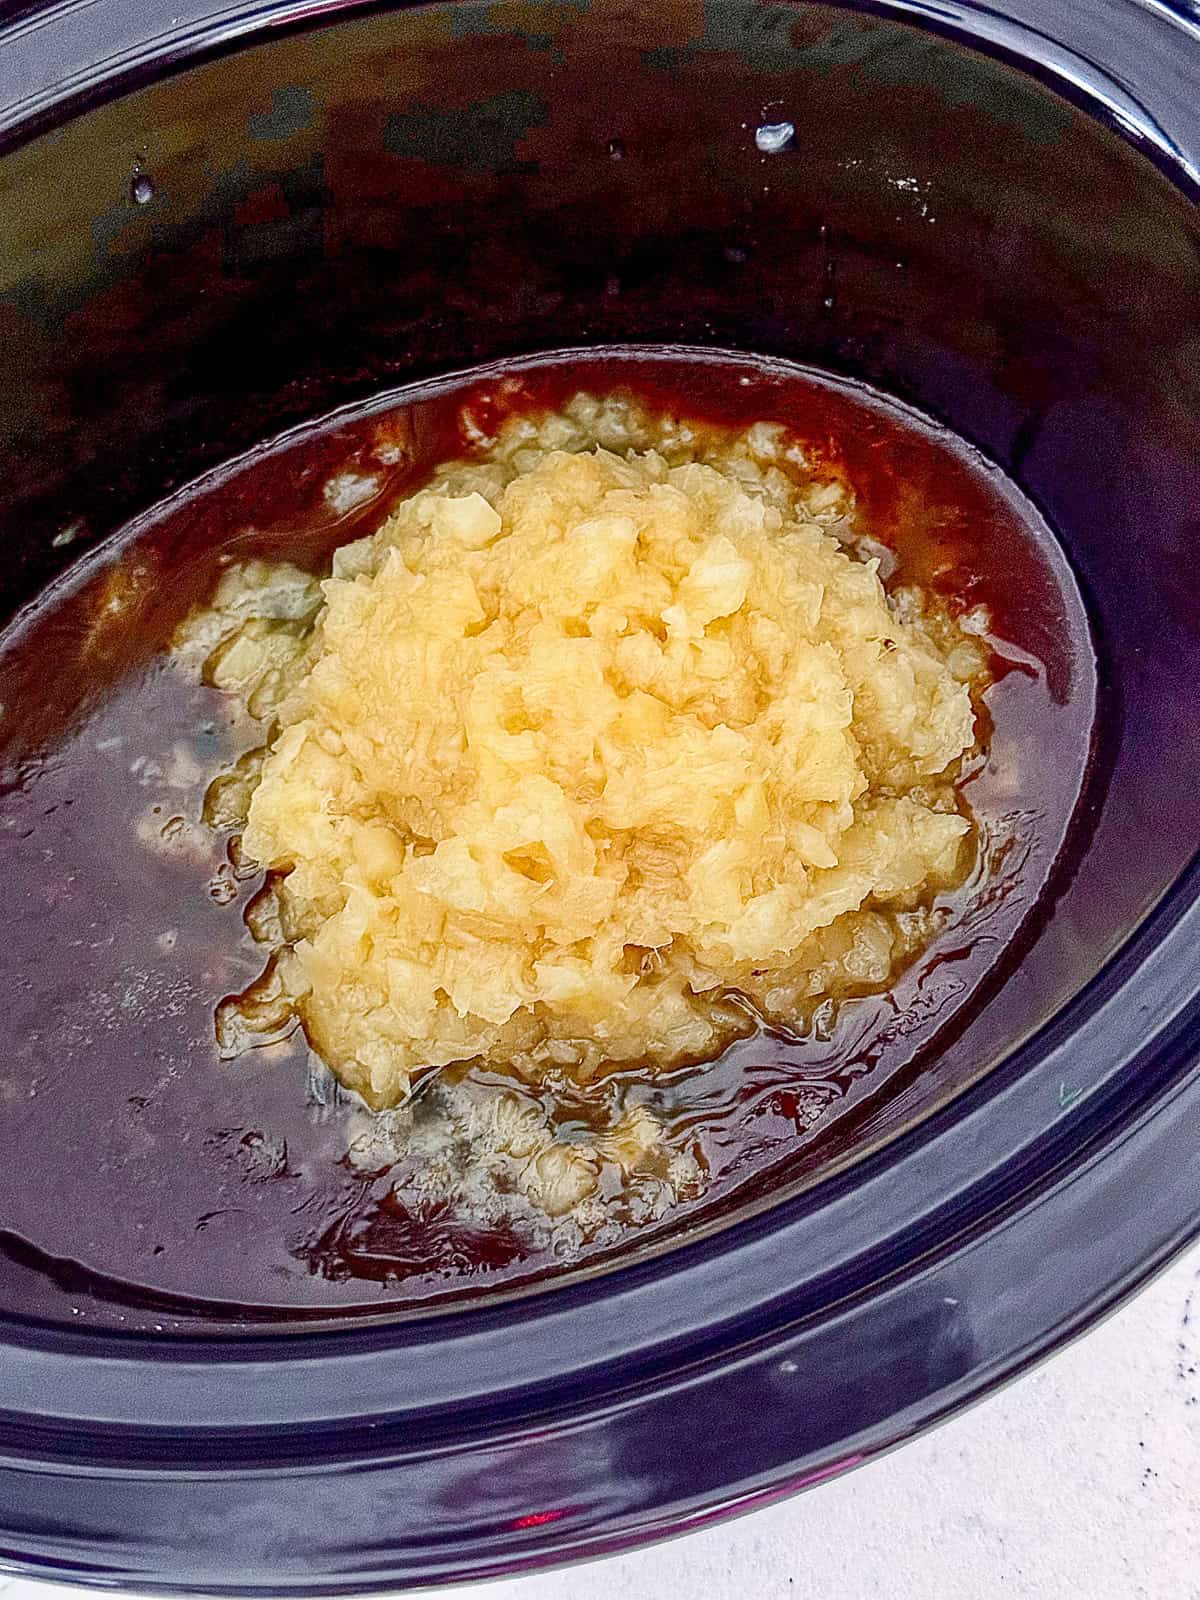 Pineapple and BBQ sauce in a crock pot